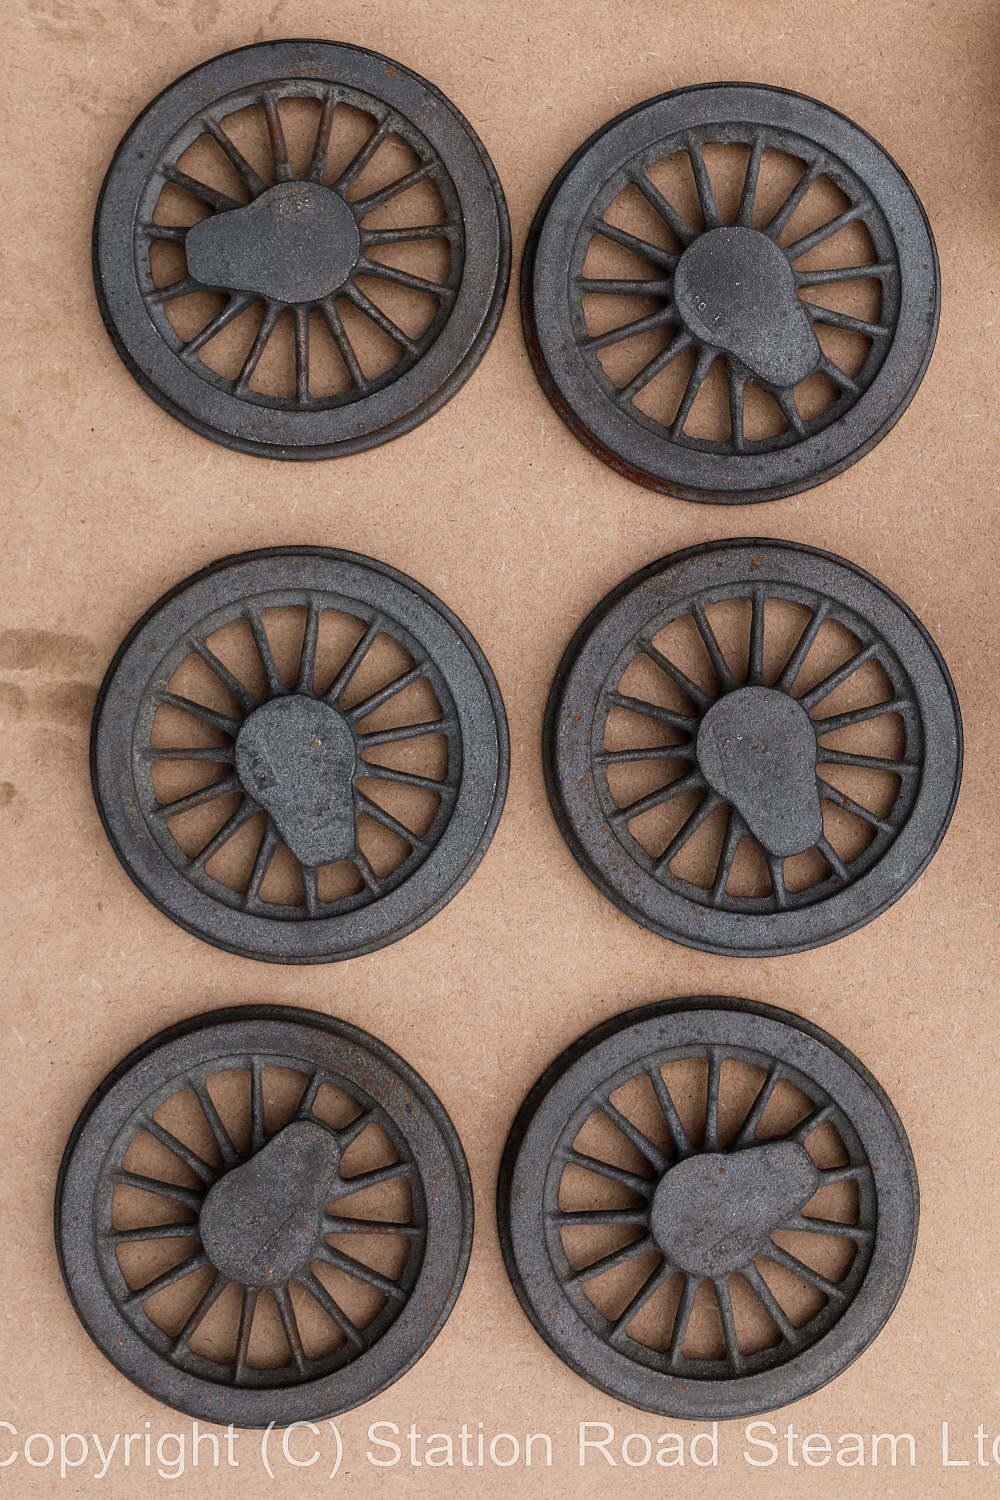 Set 5 inch gauge 78000 castings with commercial boiler